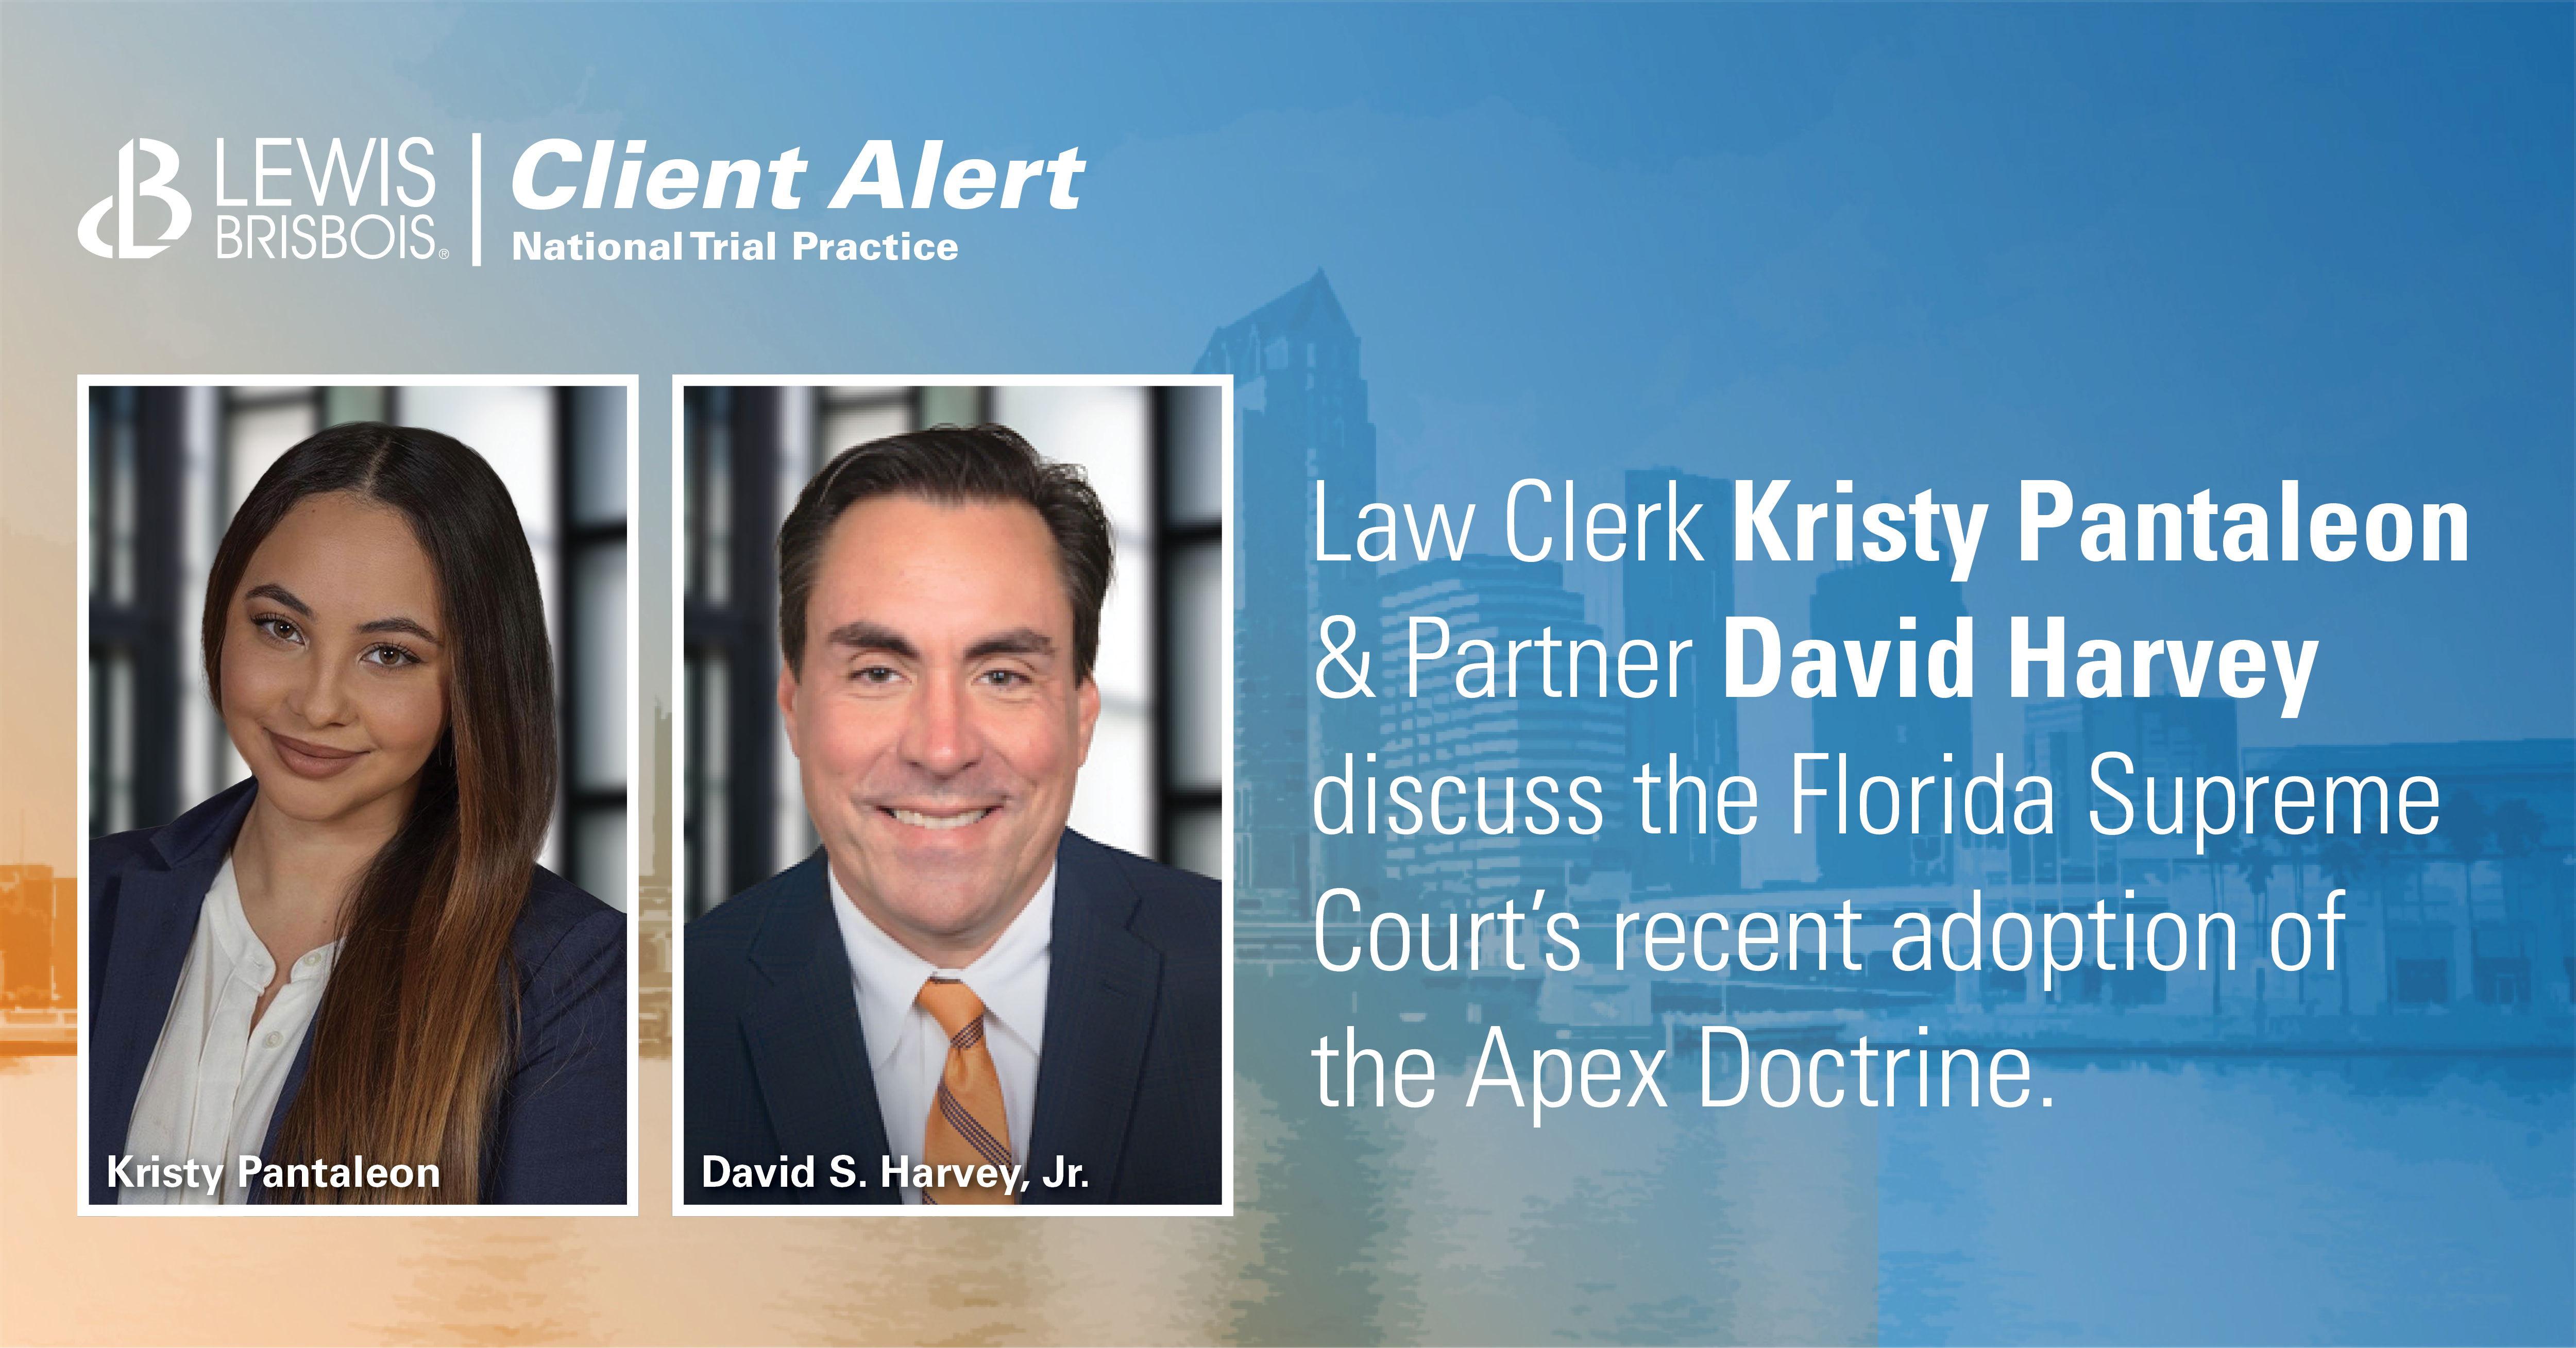 Florida Supreme Court Adopts Apex Doctrine, Provides Protections for High- Level Corporate Officials - Lewis Brisbois Bisgaard & Smith LLP